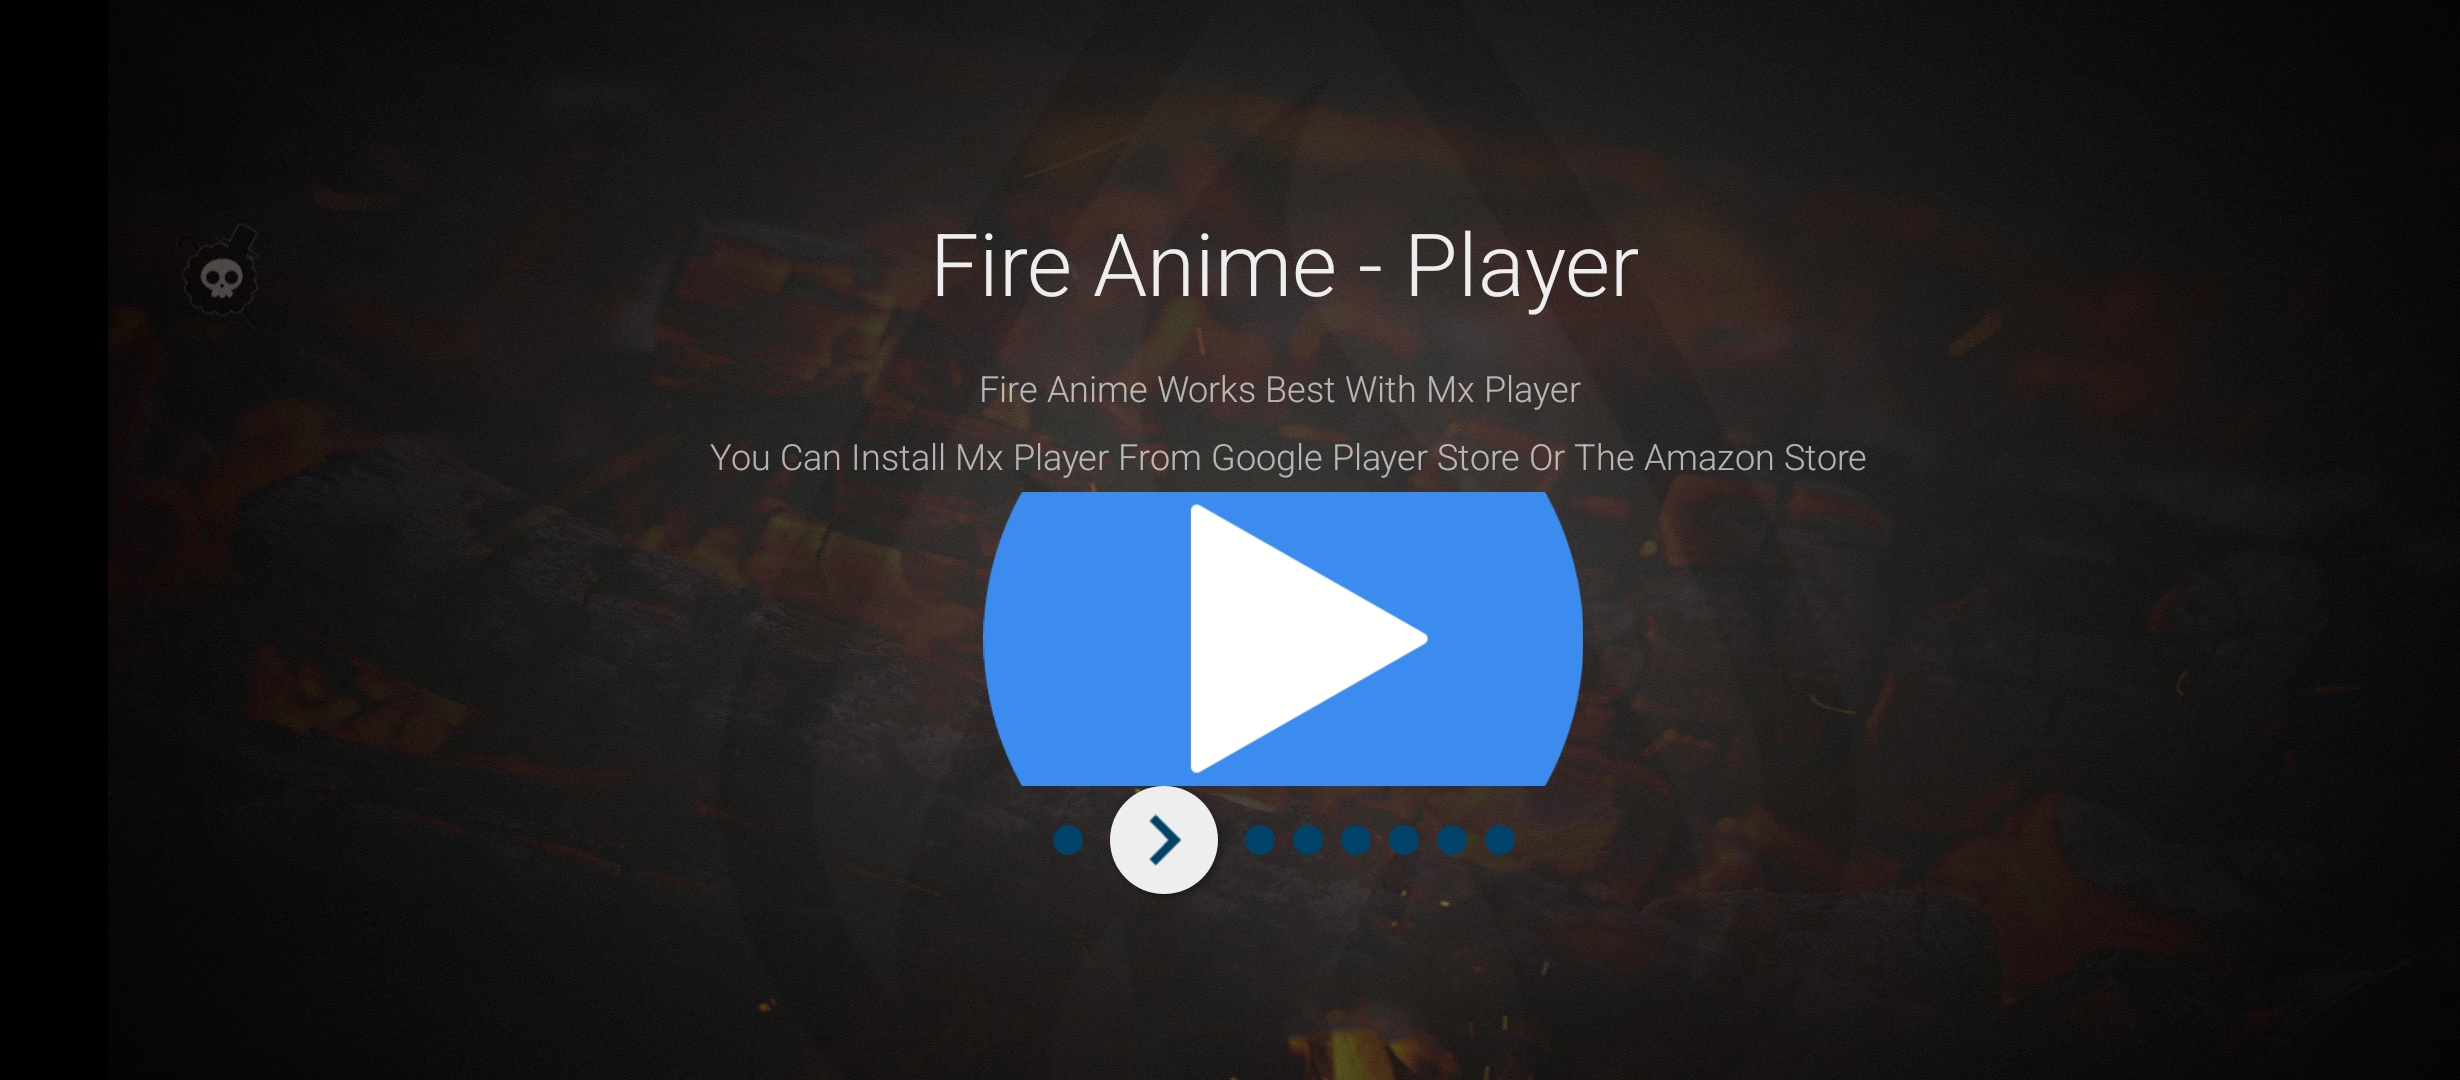 FireAnime suggesting MXPlayer